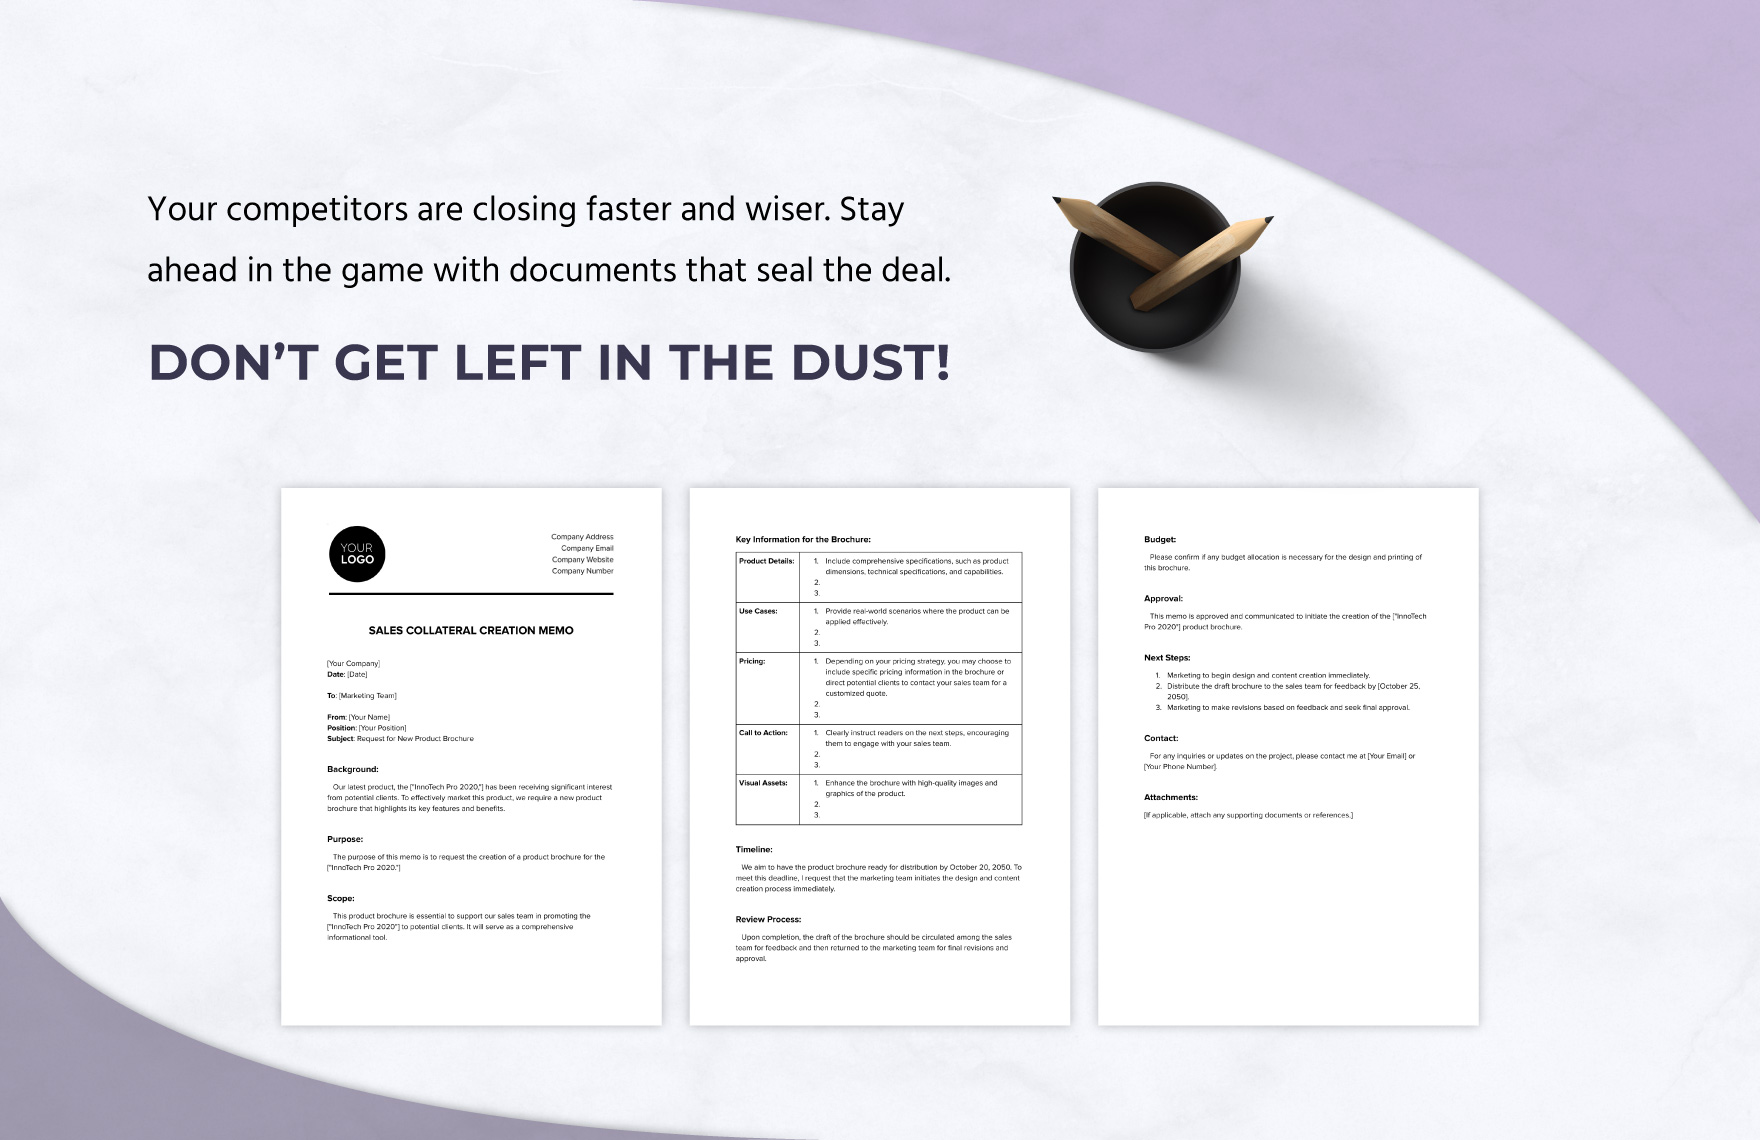 Sales Collateral Creation Memo Template